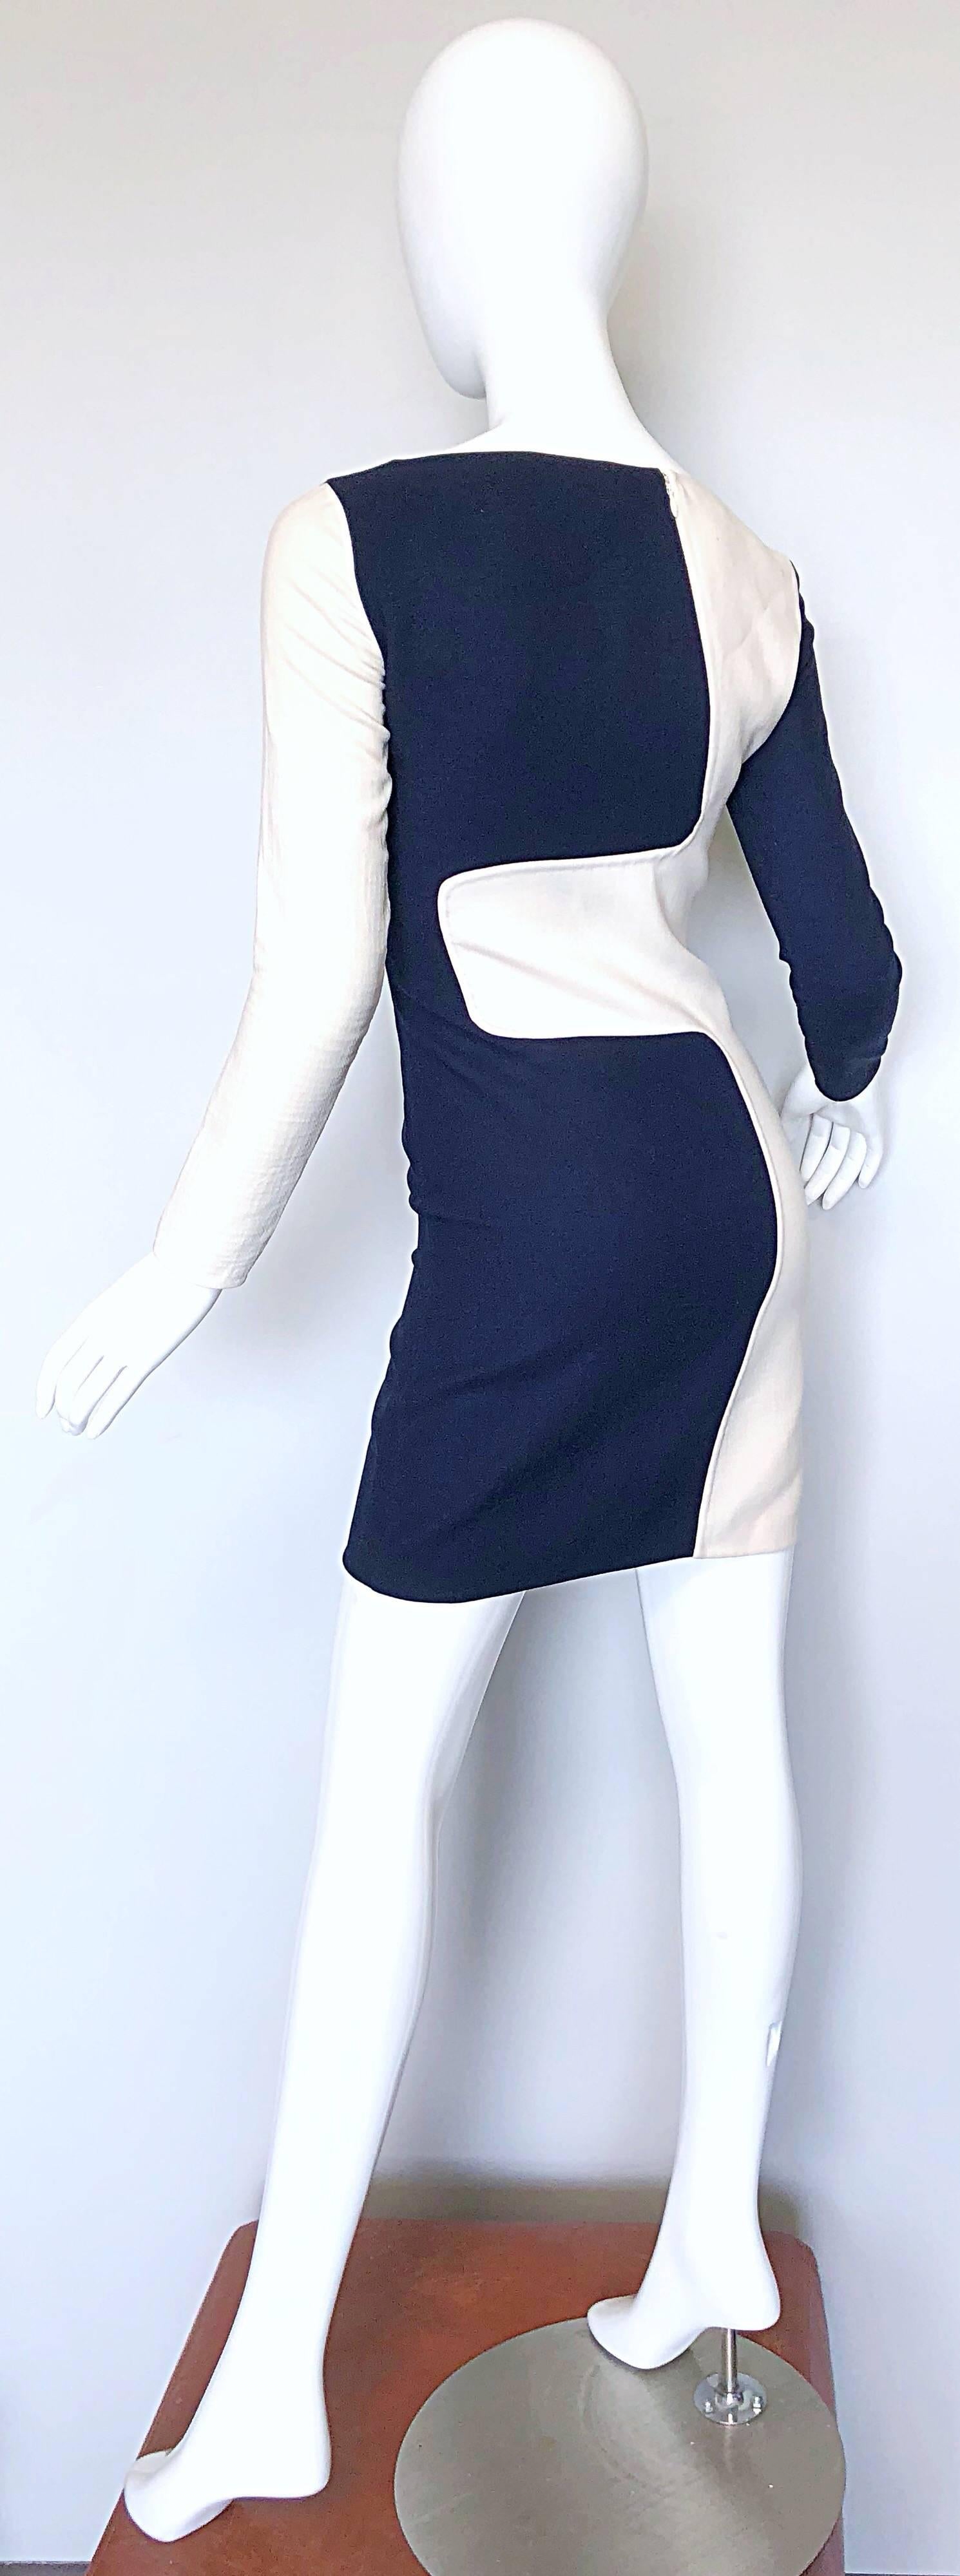 Women's Michael Kors Collection Spring 2013 Size 0 / 2 Navy Blue and White Puzzle Dress For Sale